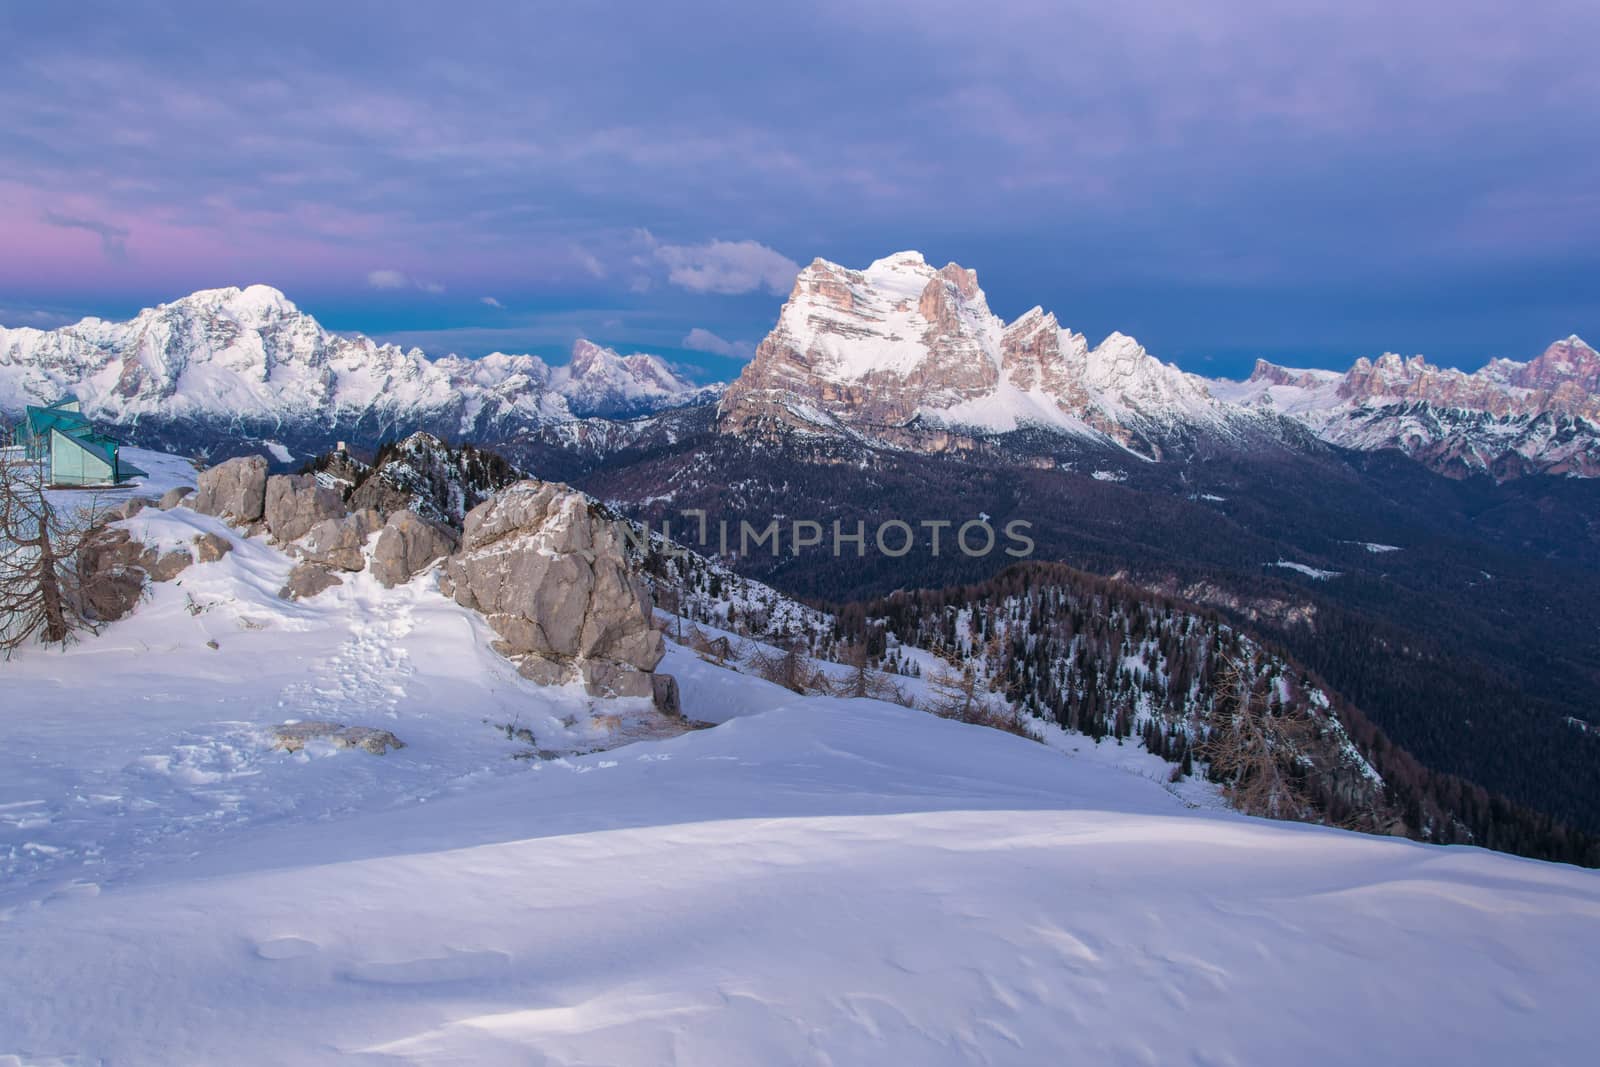 Dolomites in winter during the sunrise